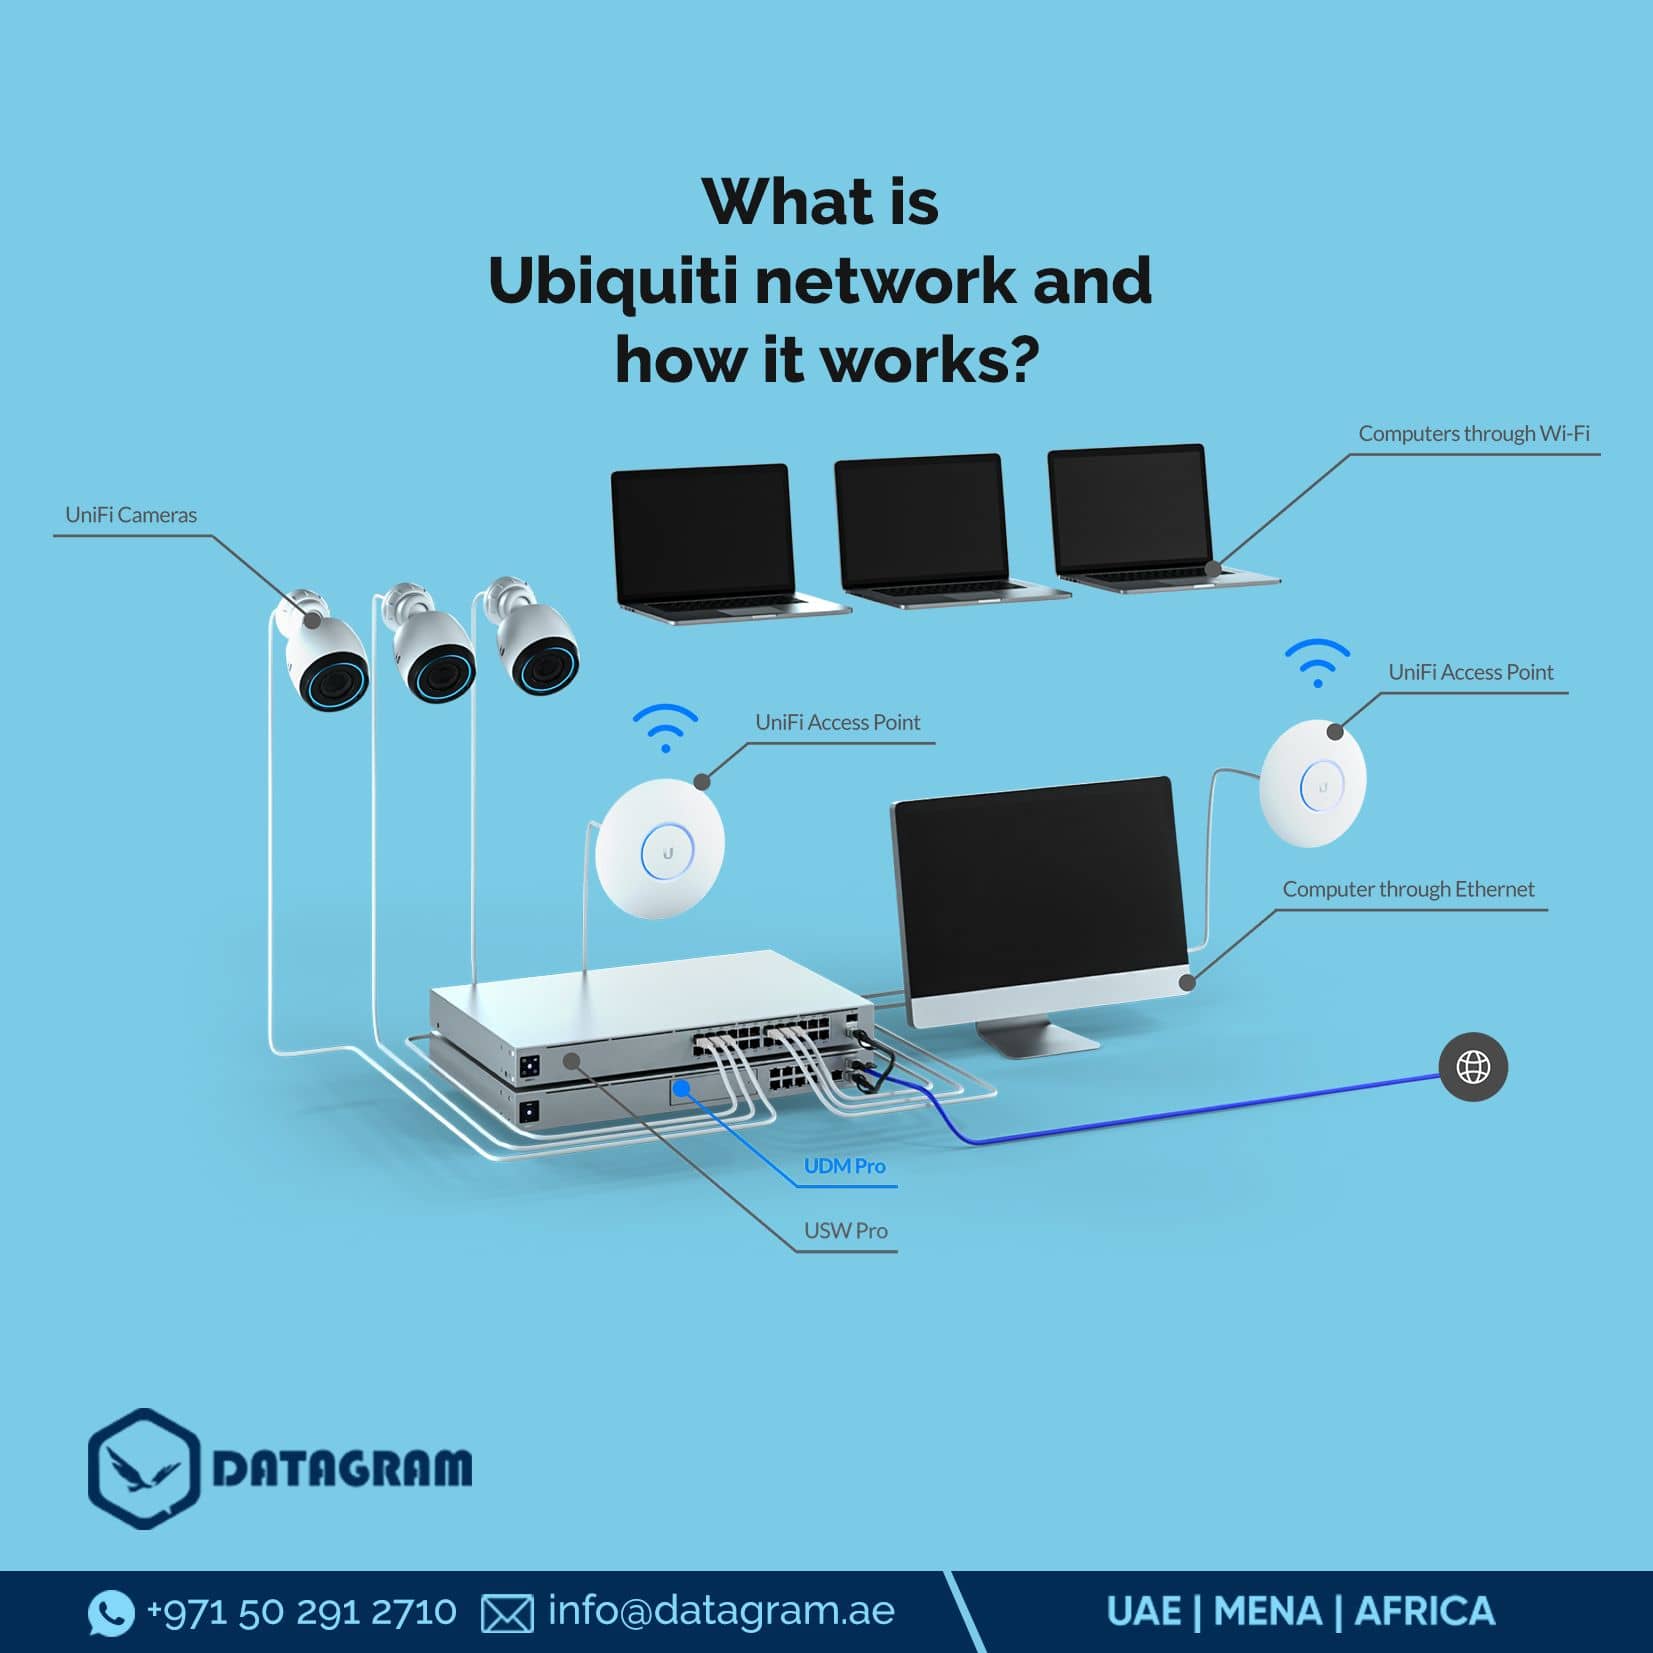 What is Ubiquiti network and how it works?